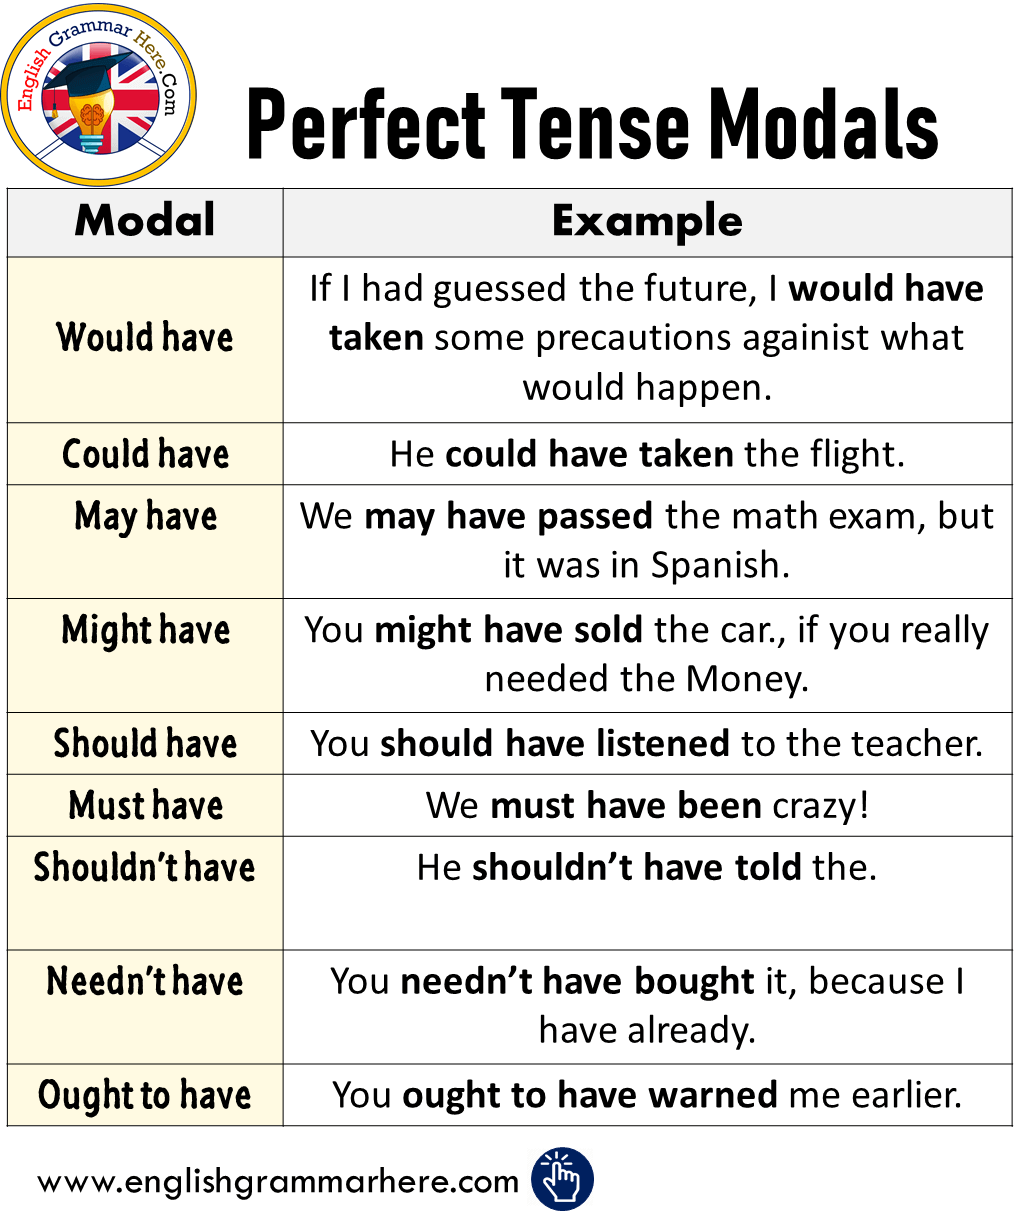 Perfect Tense Modals in English